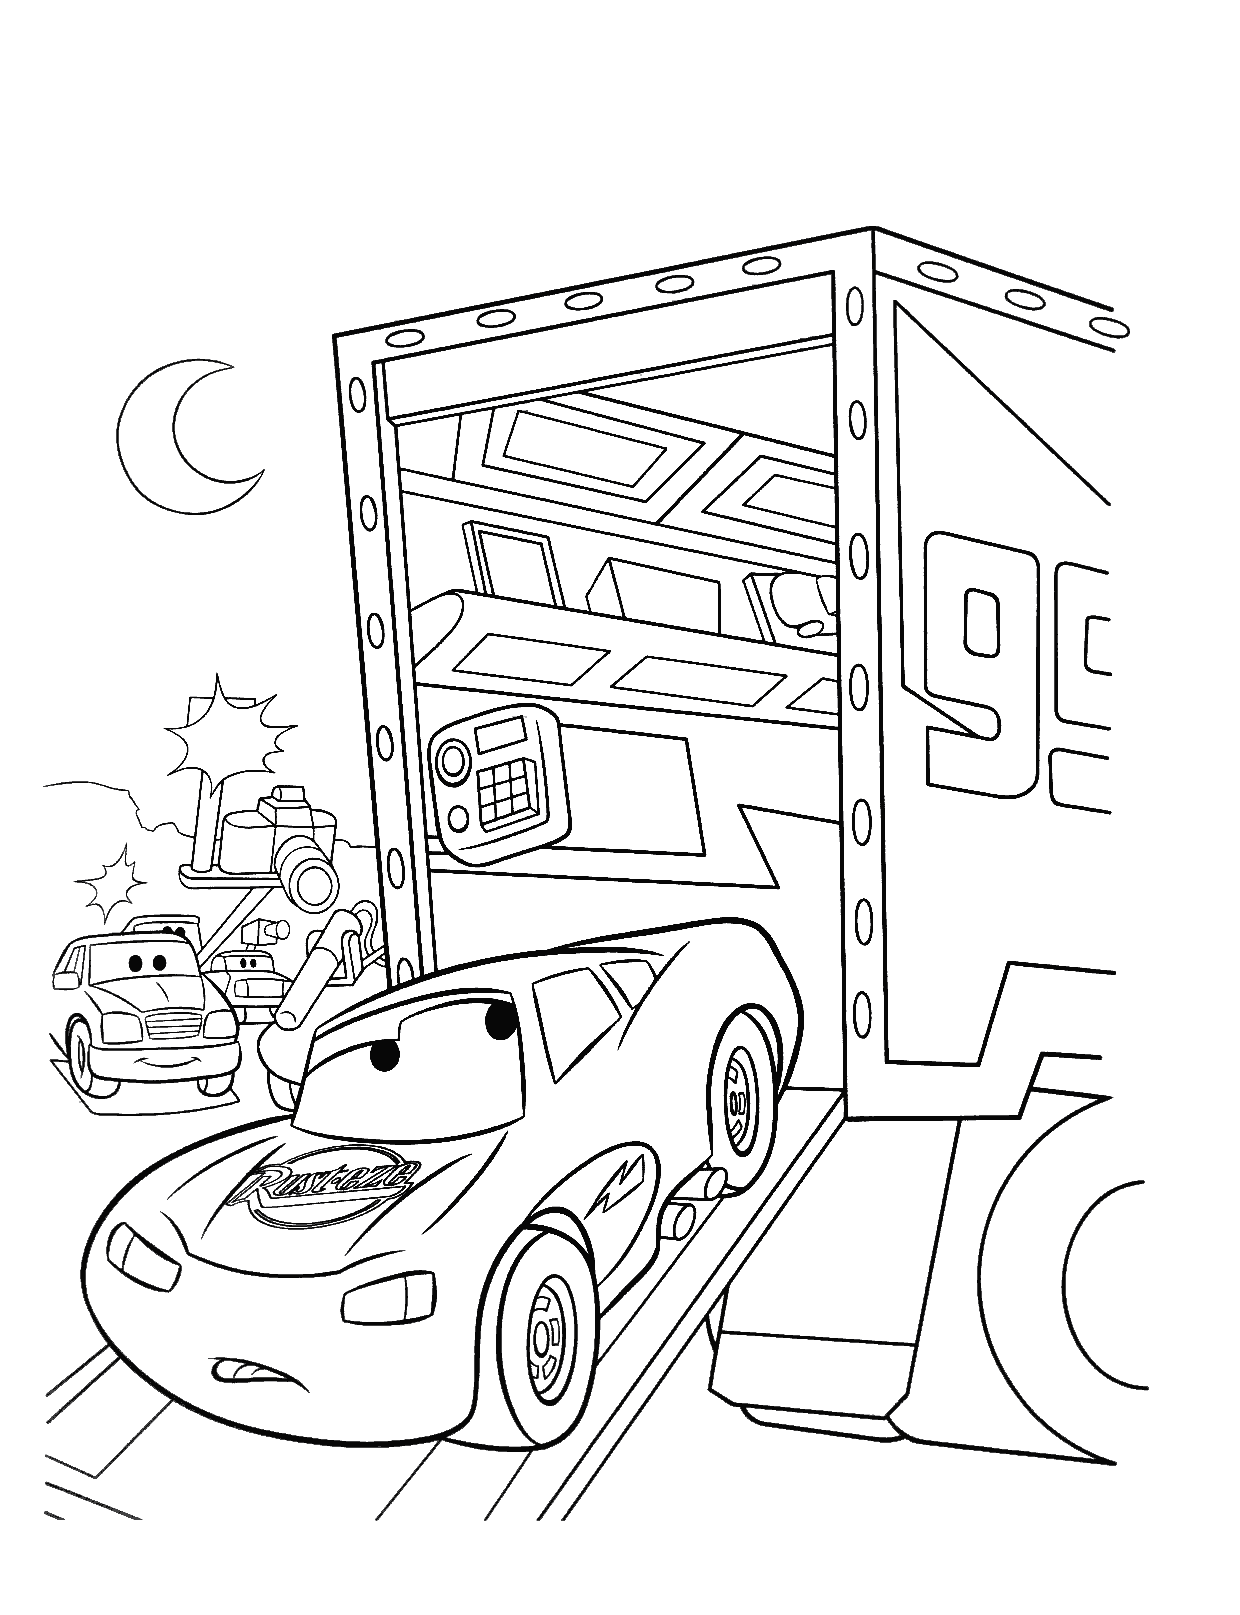 lightning-mcqueen-coloring-pages-printable